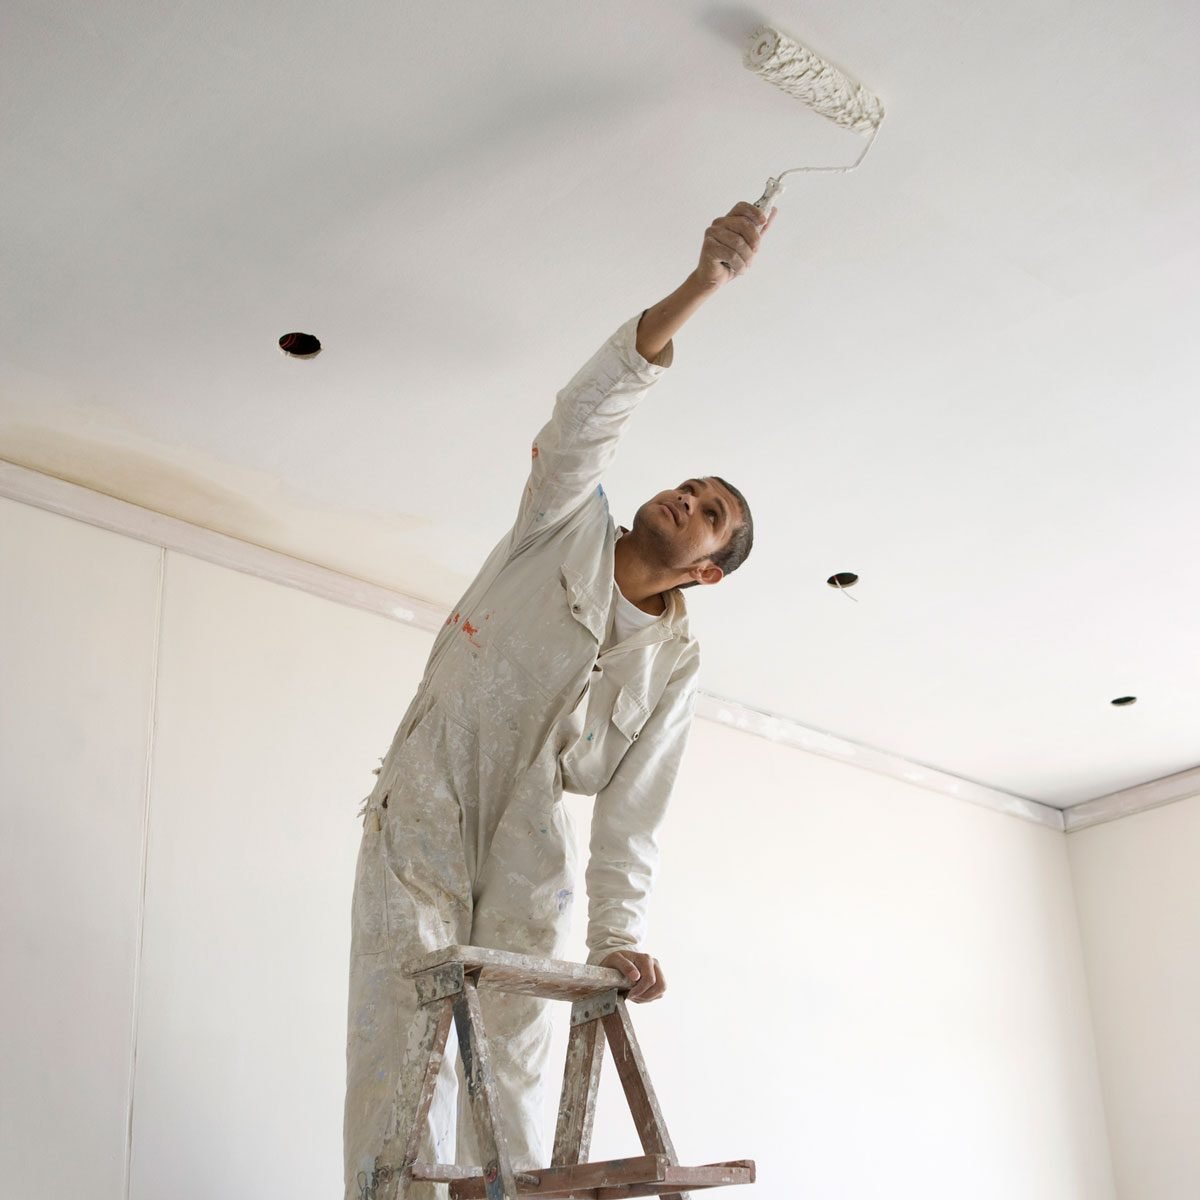 Painting A Ceiling GettyImages 81948643 ?resize=522%2C522